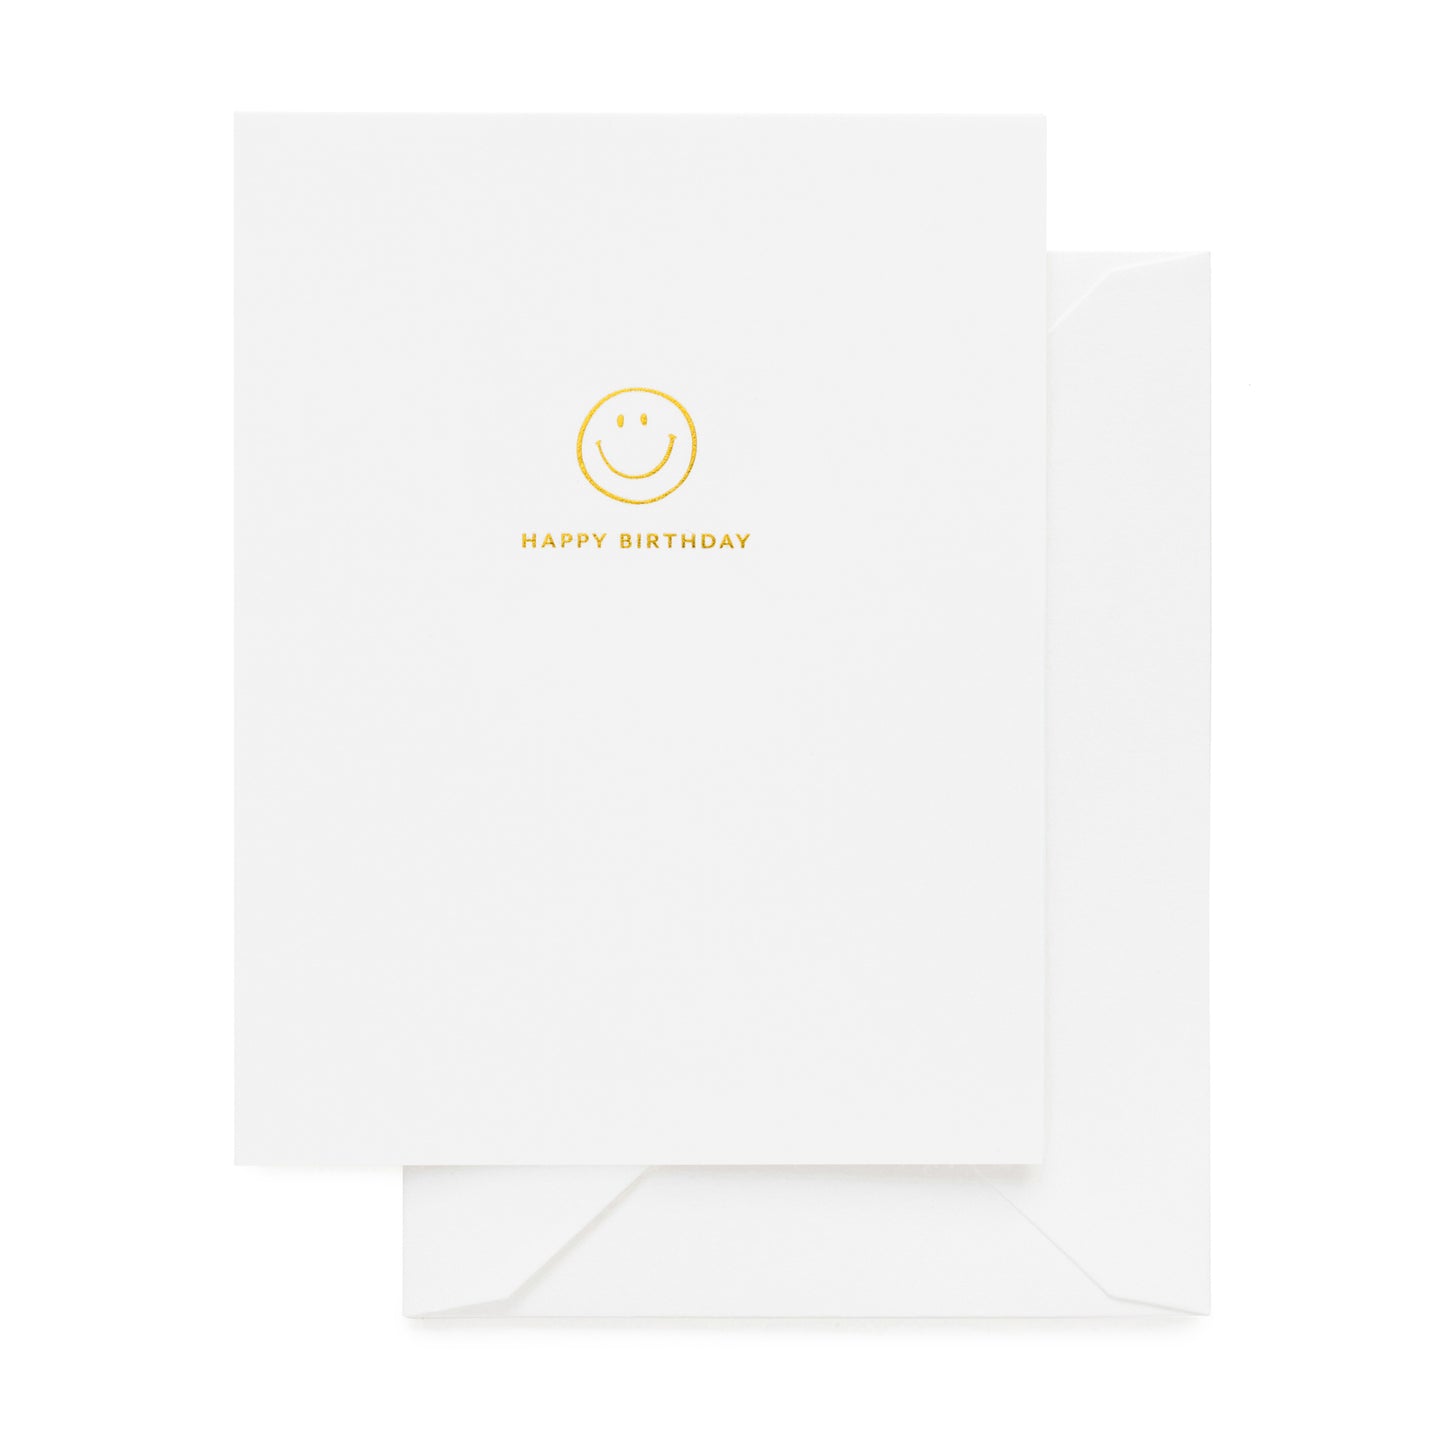 Gold foil happy birthday card with a smiley face